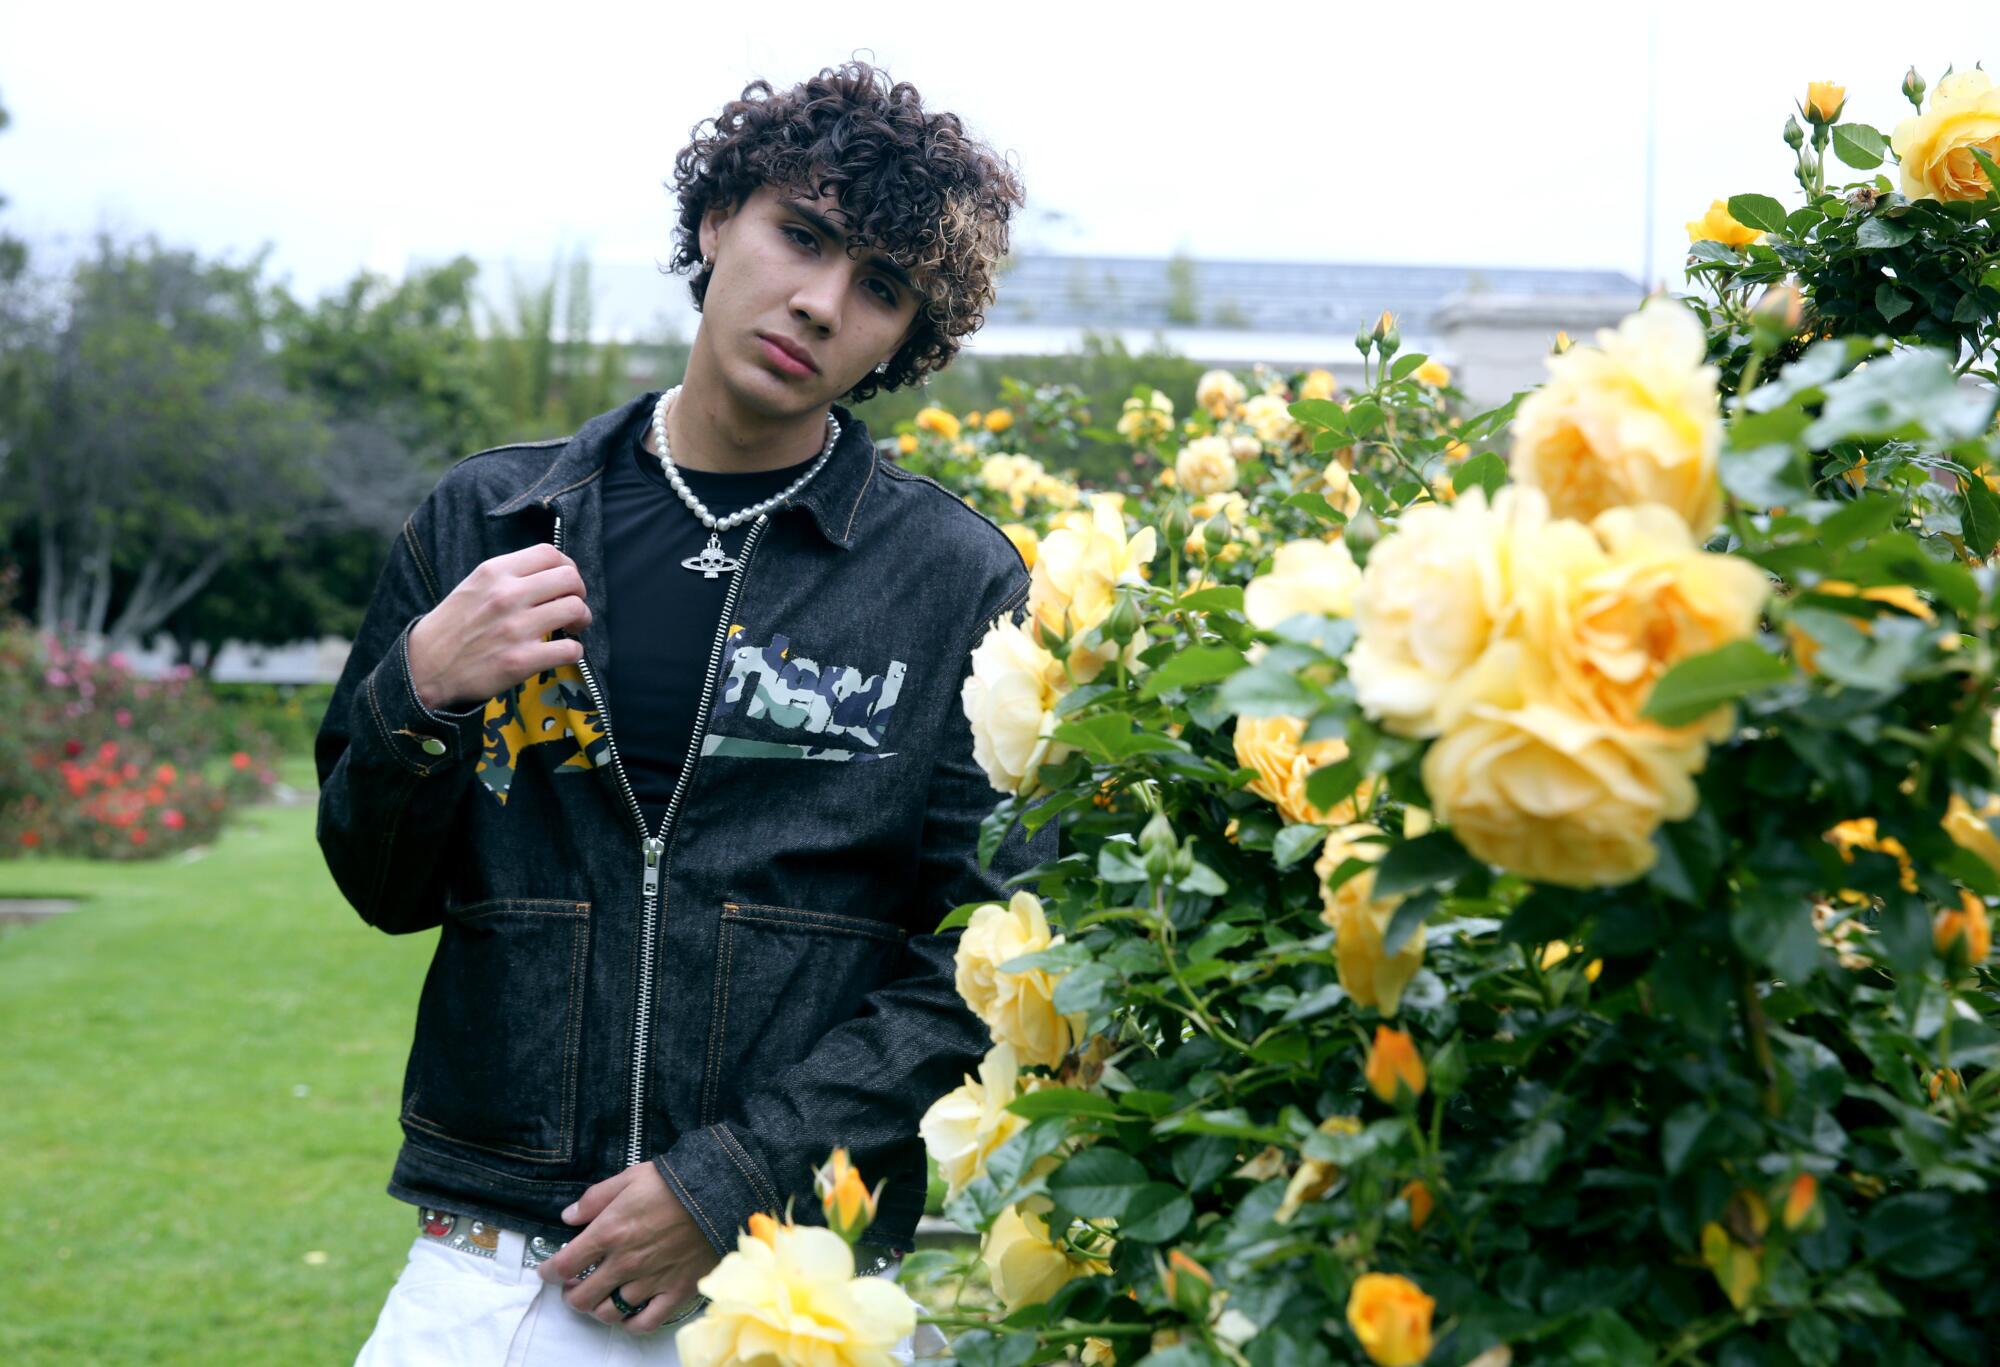 A man in a black jacket and shirt next to a bush of yellow flowers in a park